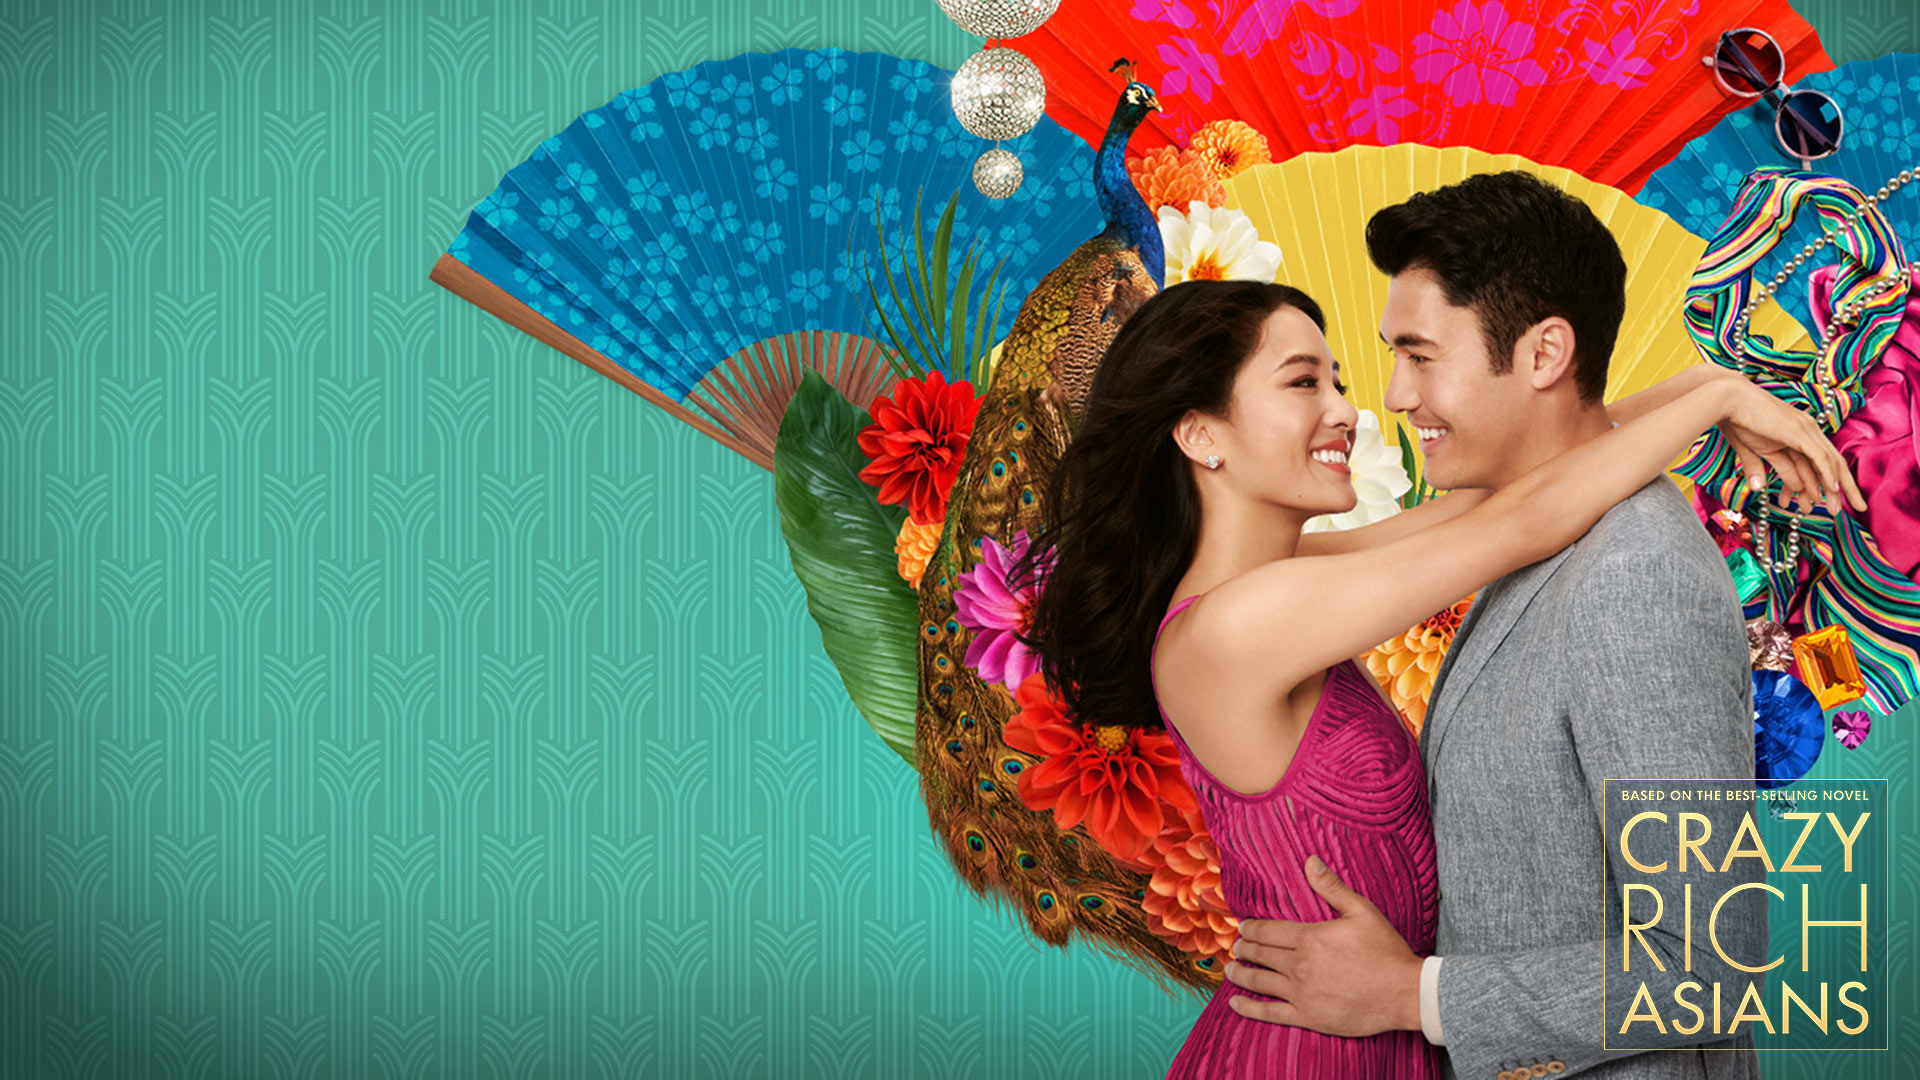 promotional movie image for crazy rich asians